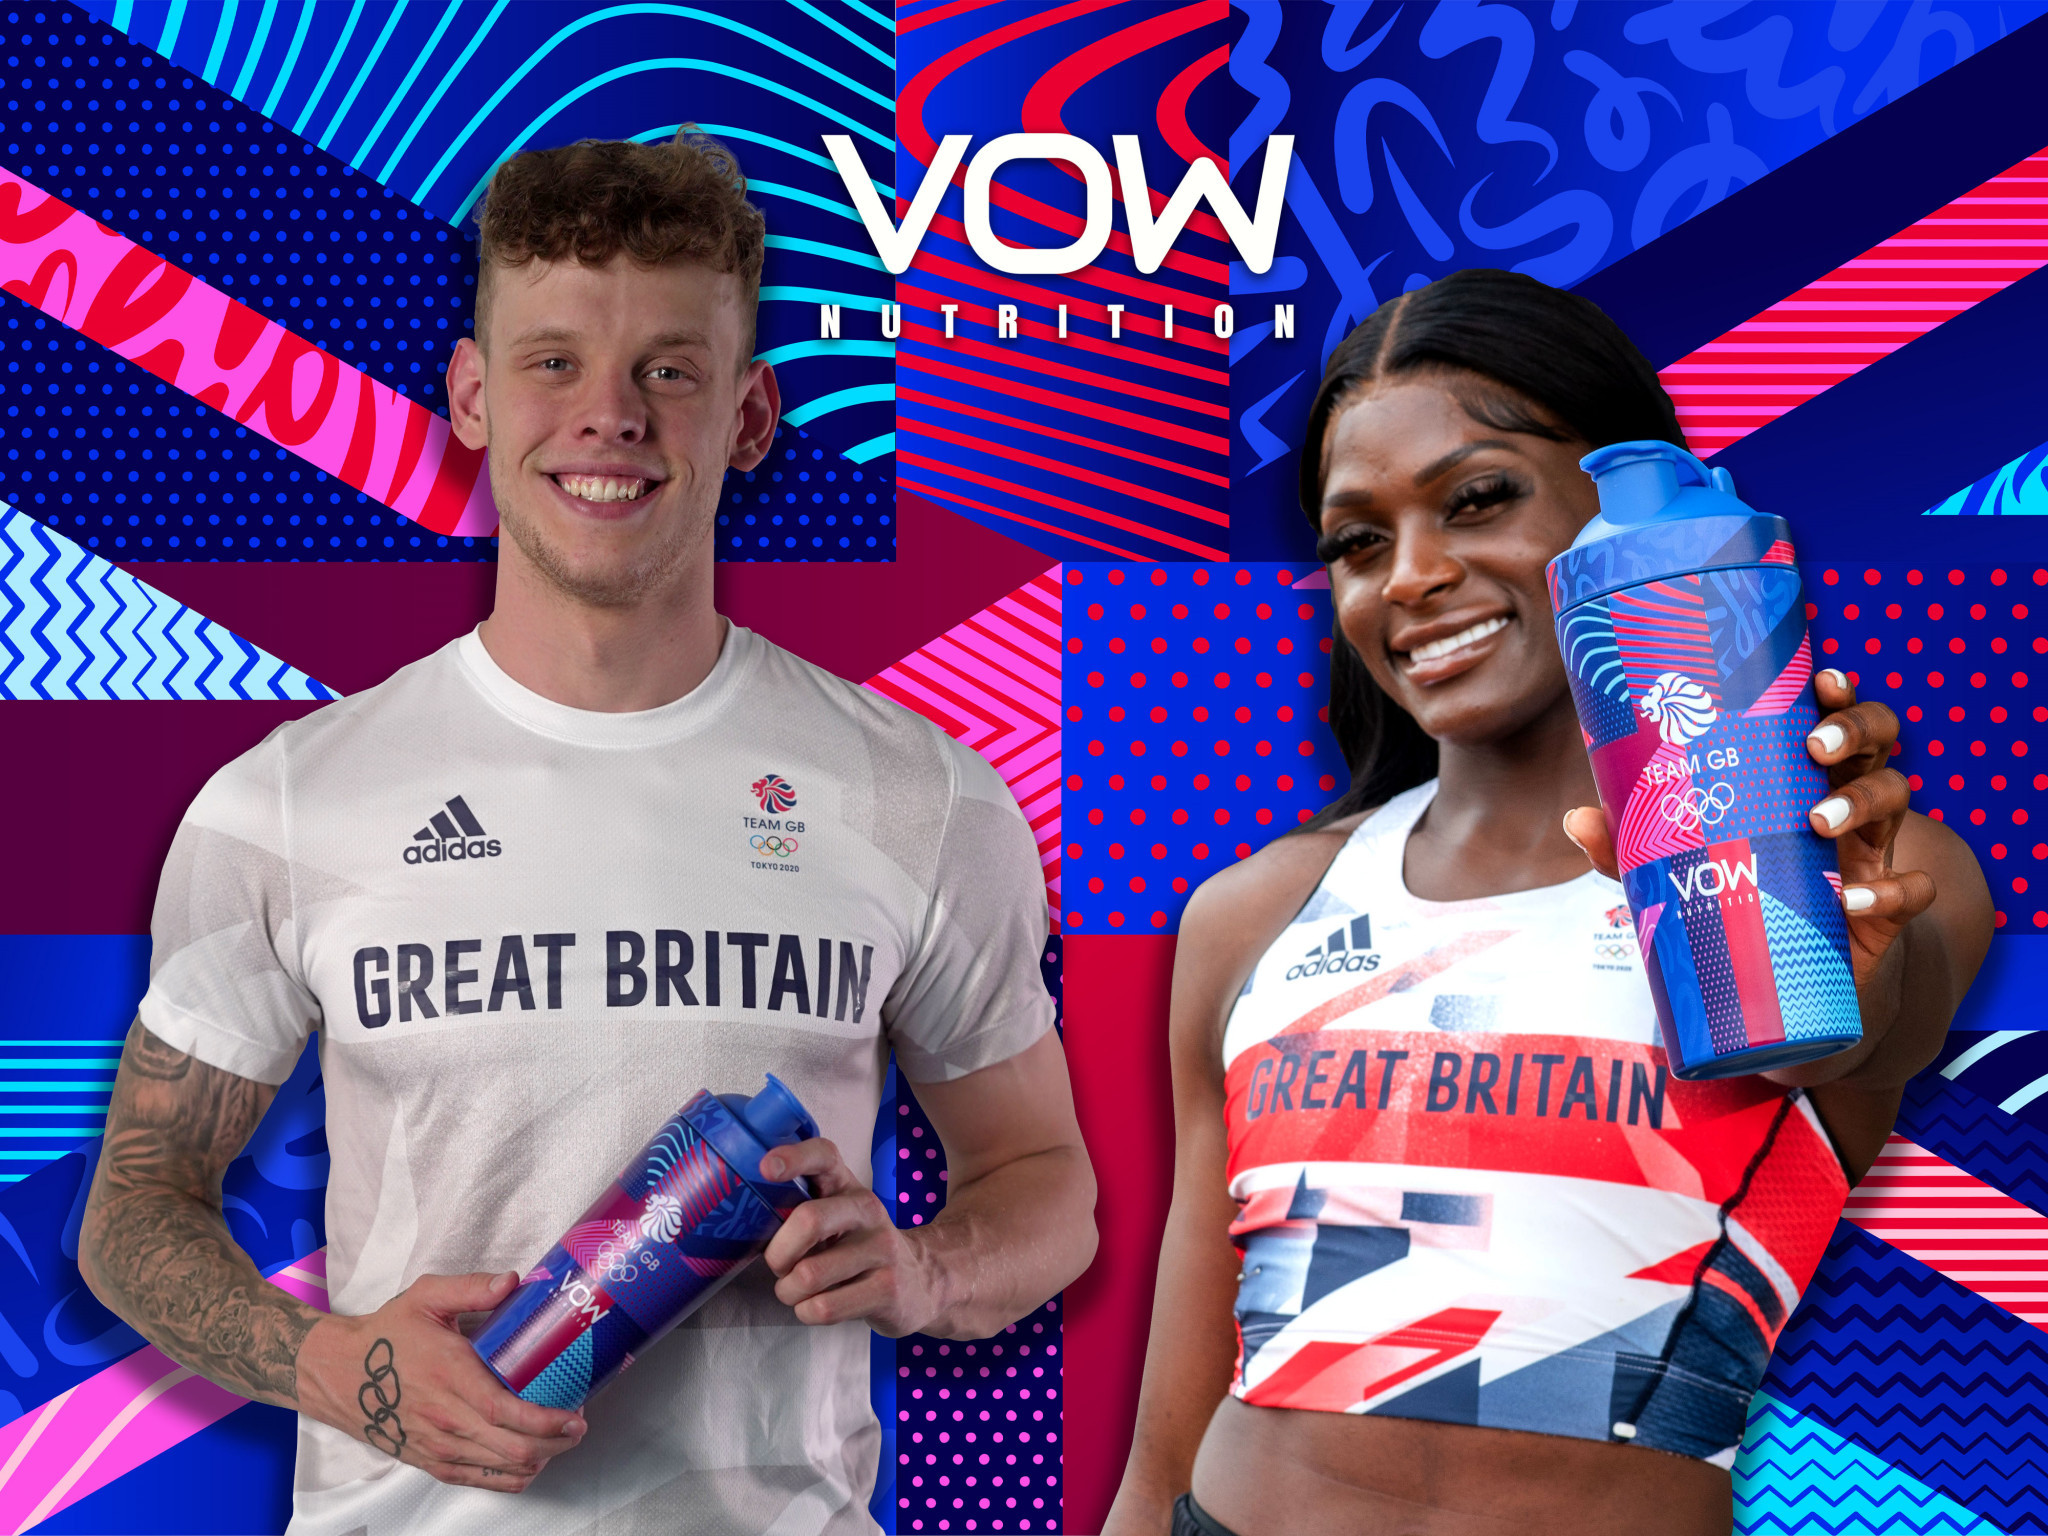 VOW Nutrition announces partnership with Team GB in run-up to Paris 2024 Olympics